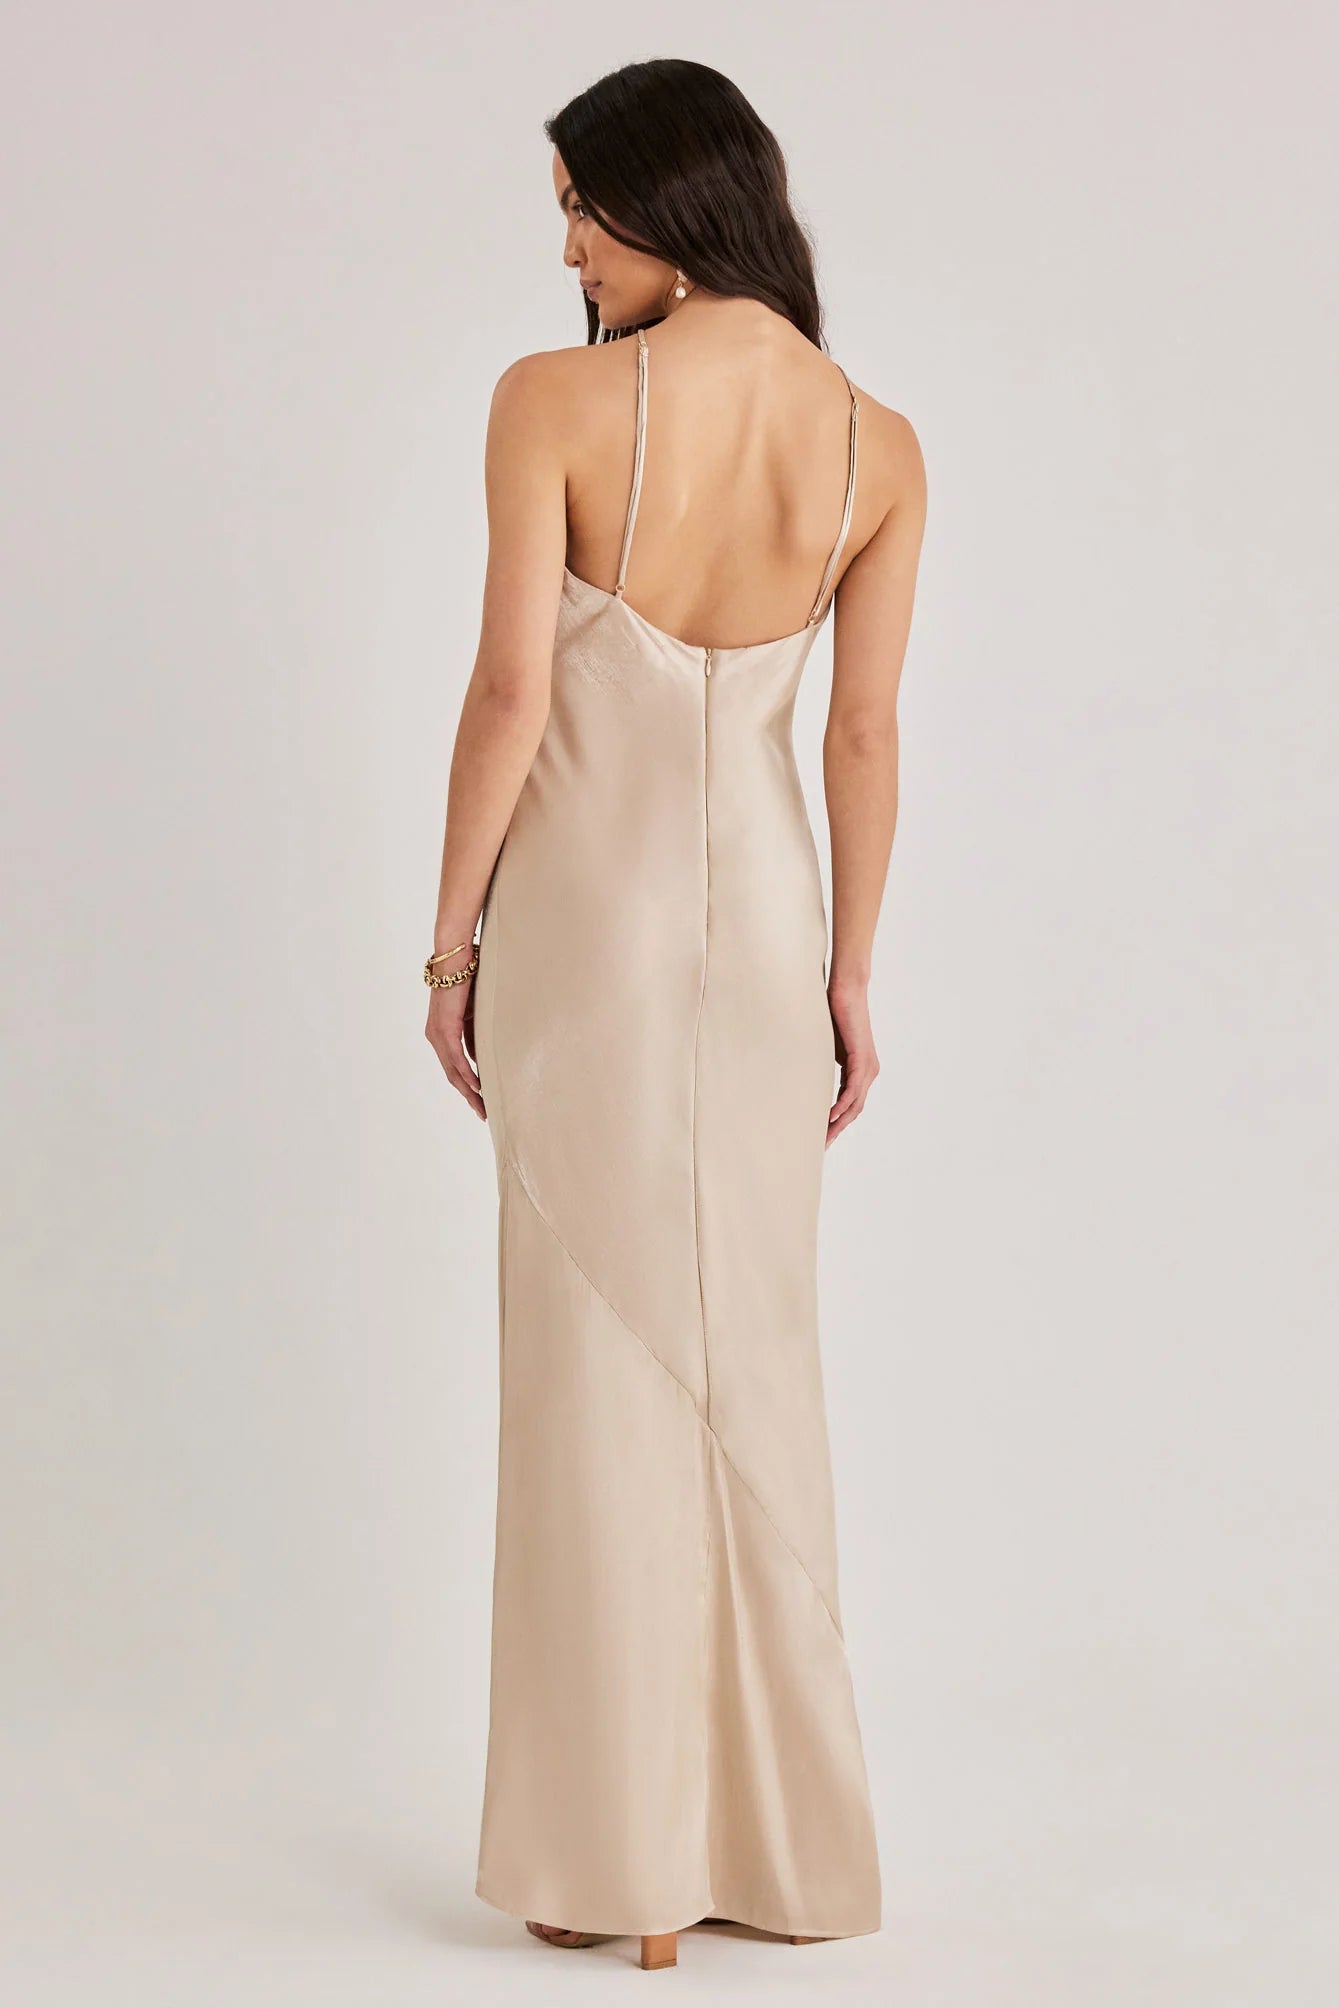 ILLUSION X GOWN | NUDE